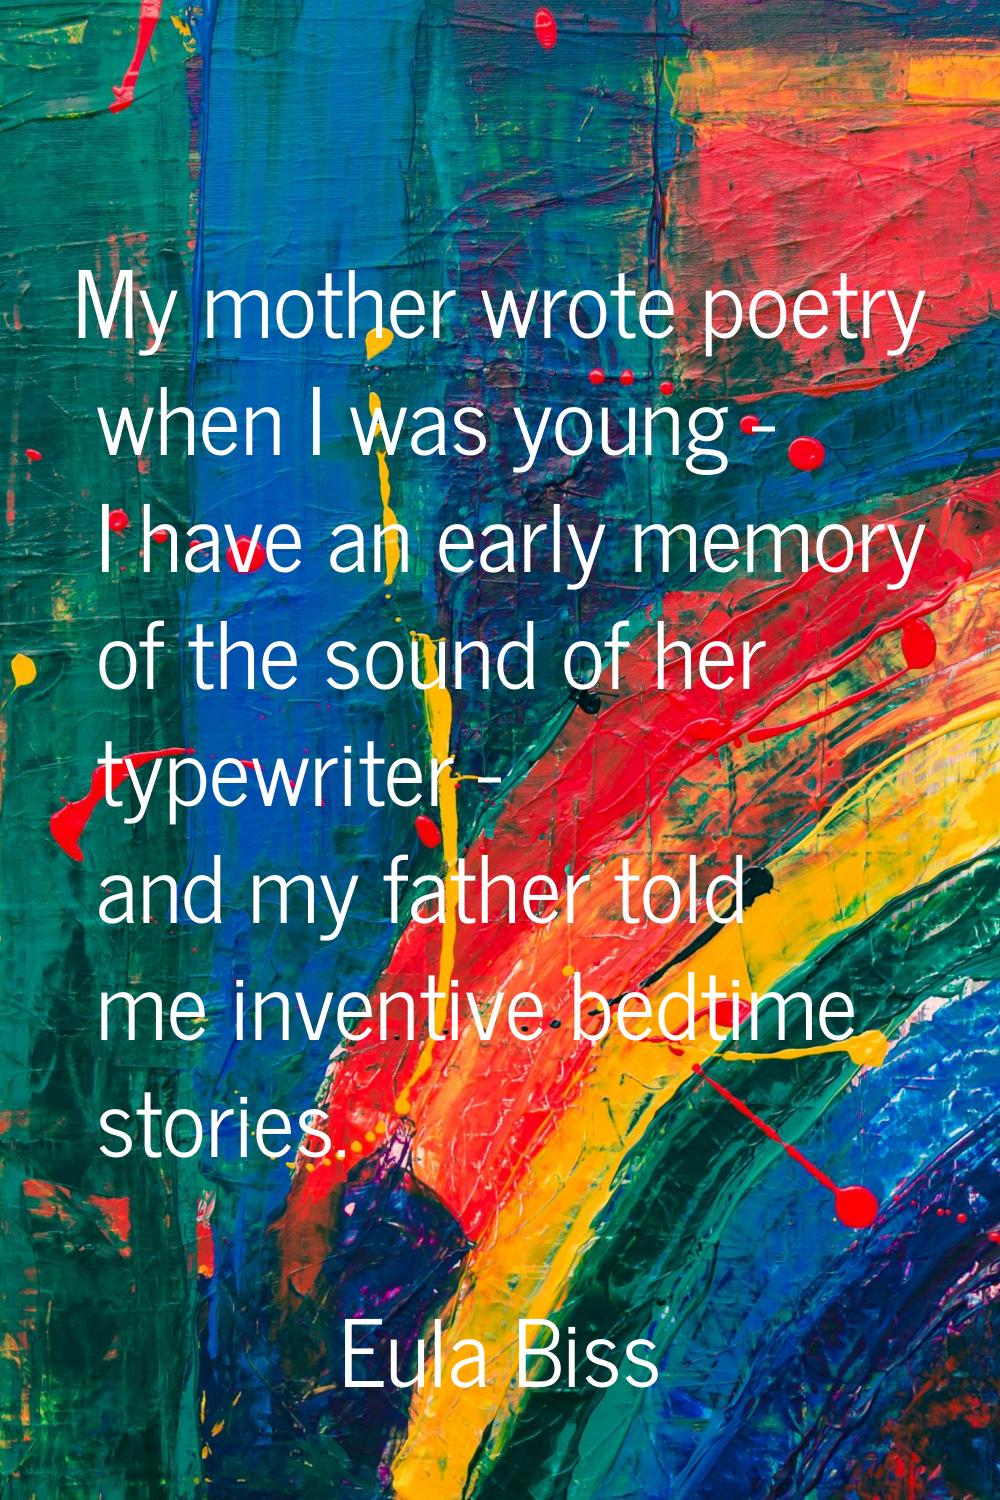 My mother wrote poetry when I was young - I have an early memory of the sound of her typewriter - a